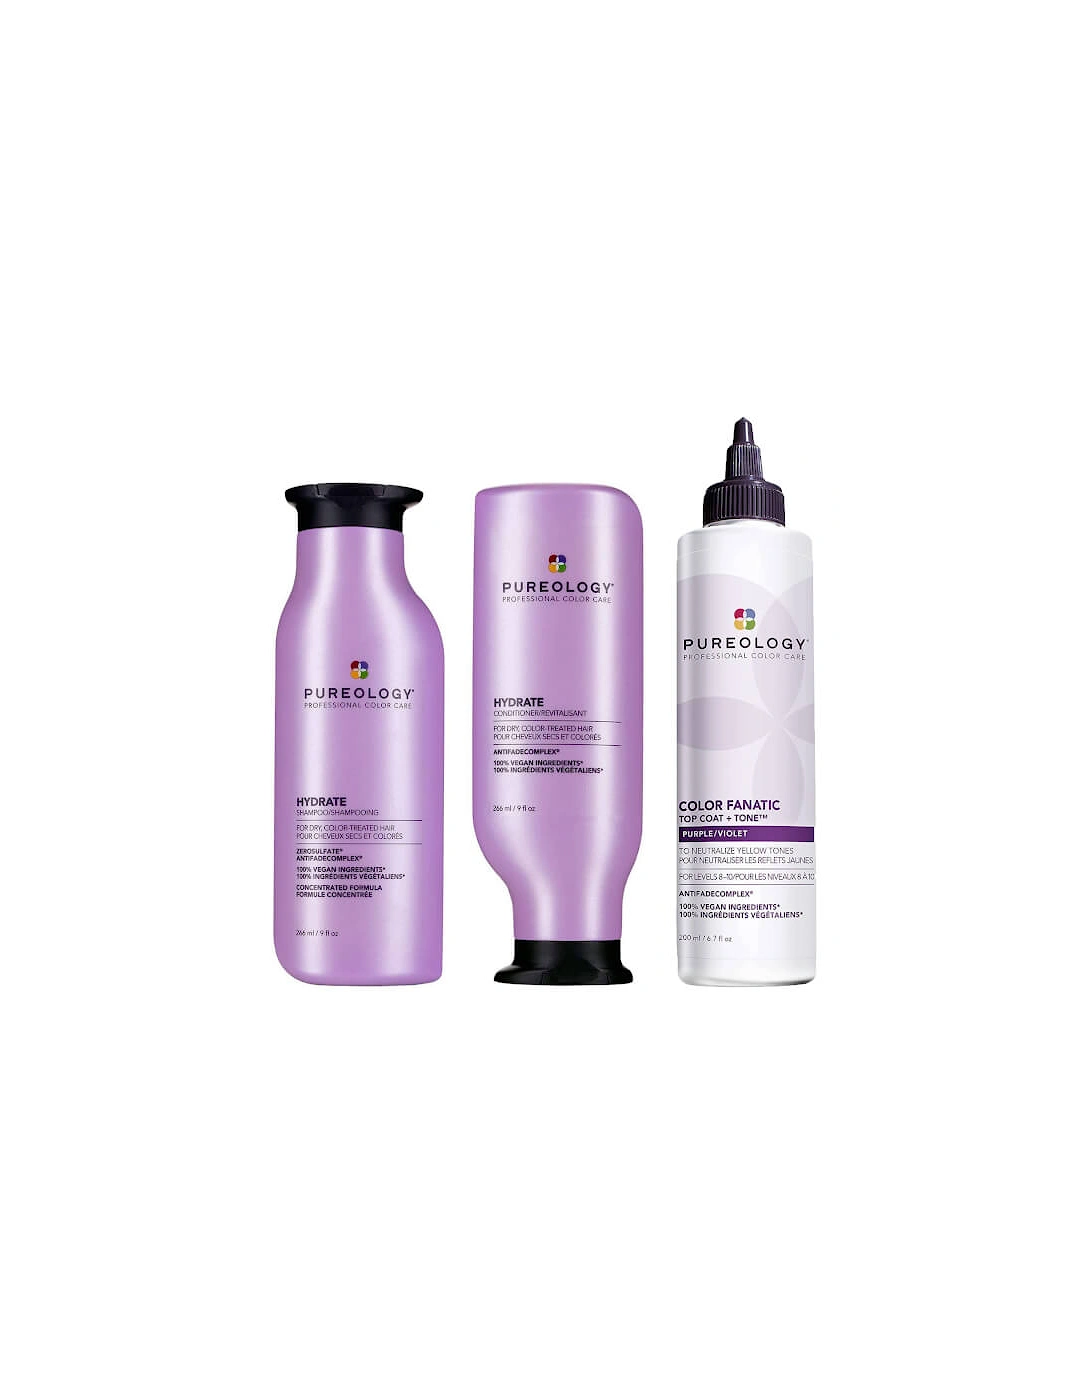 Hydrate Shampoo, Conditioner and Color Fanatic Purple Toner Routine for Neutralising and Hydrating Brassy Tones, 2 of 1